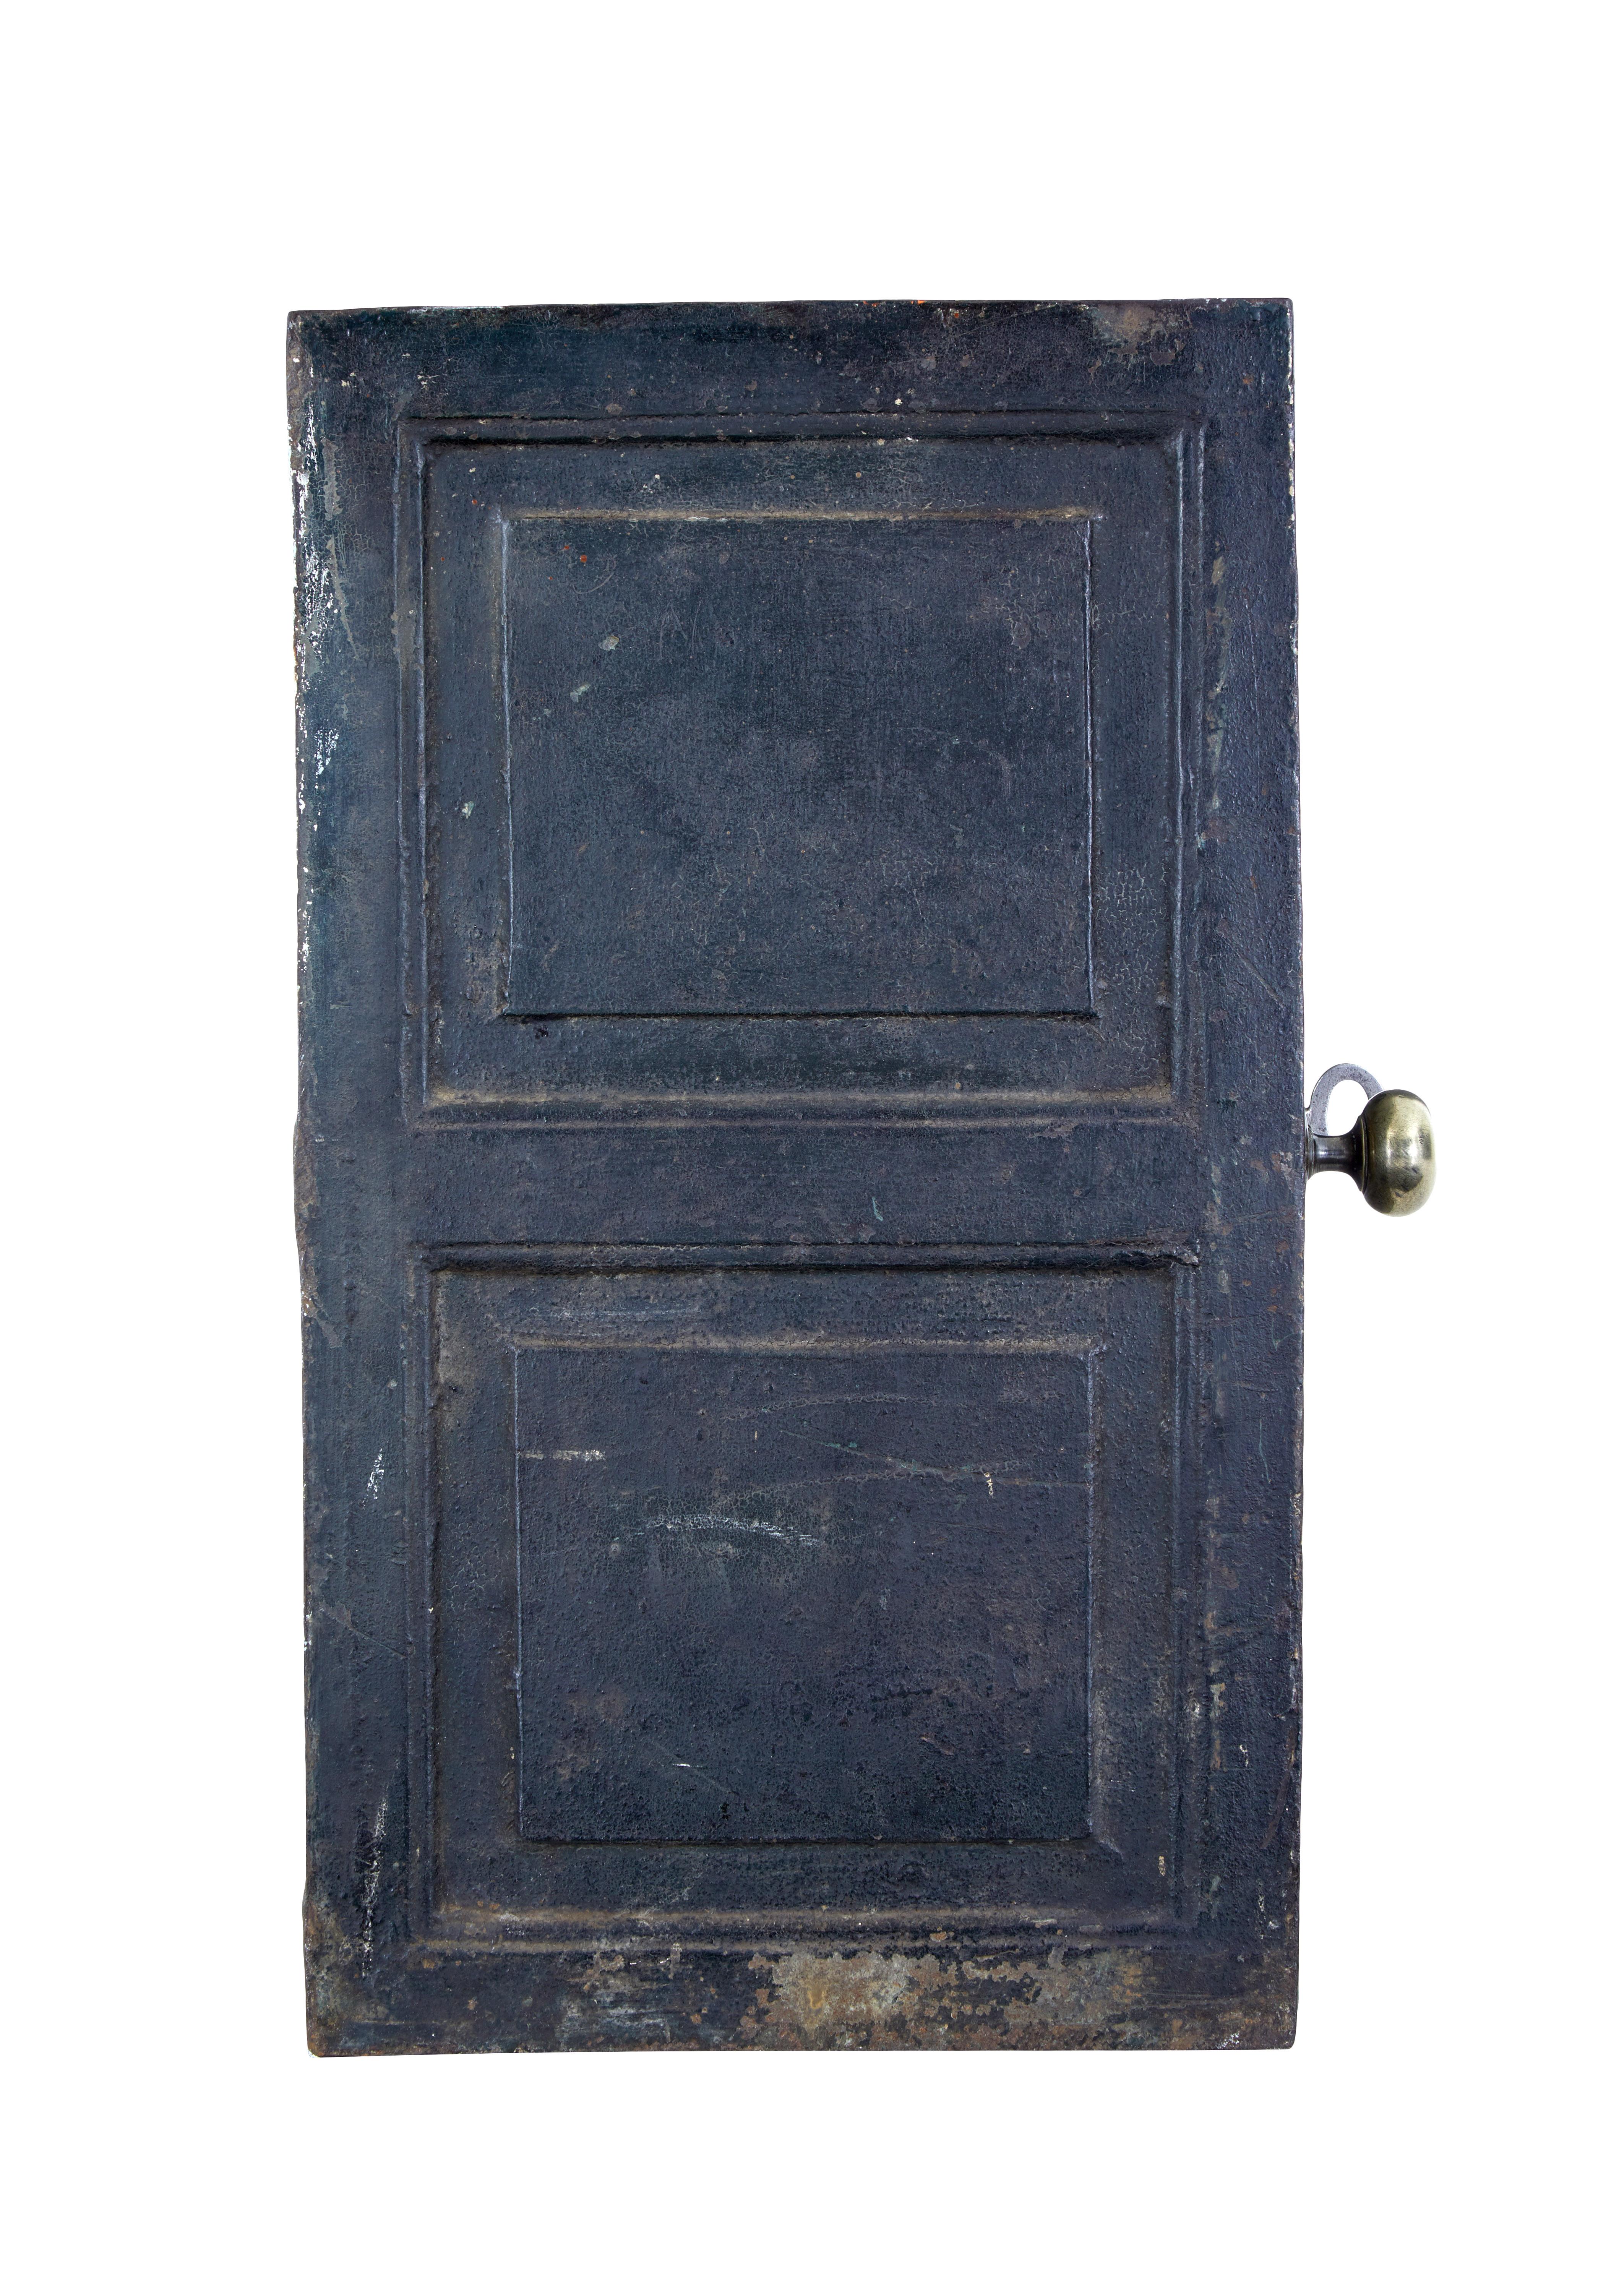 English Early 19th Century Cast Iron Safe in Original Paint